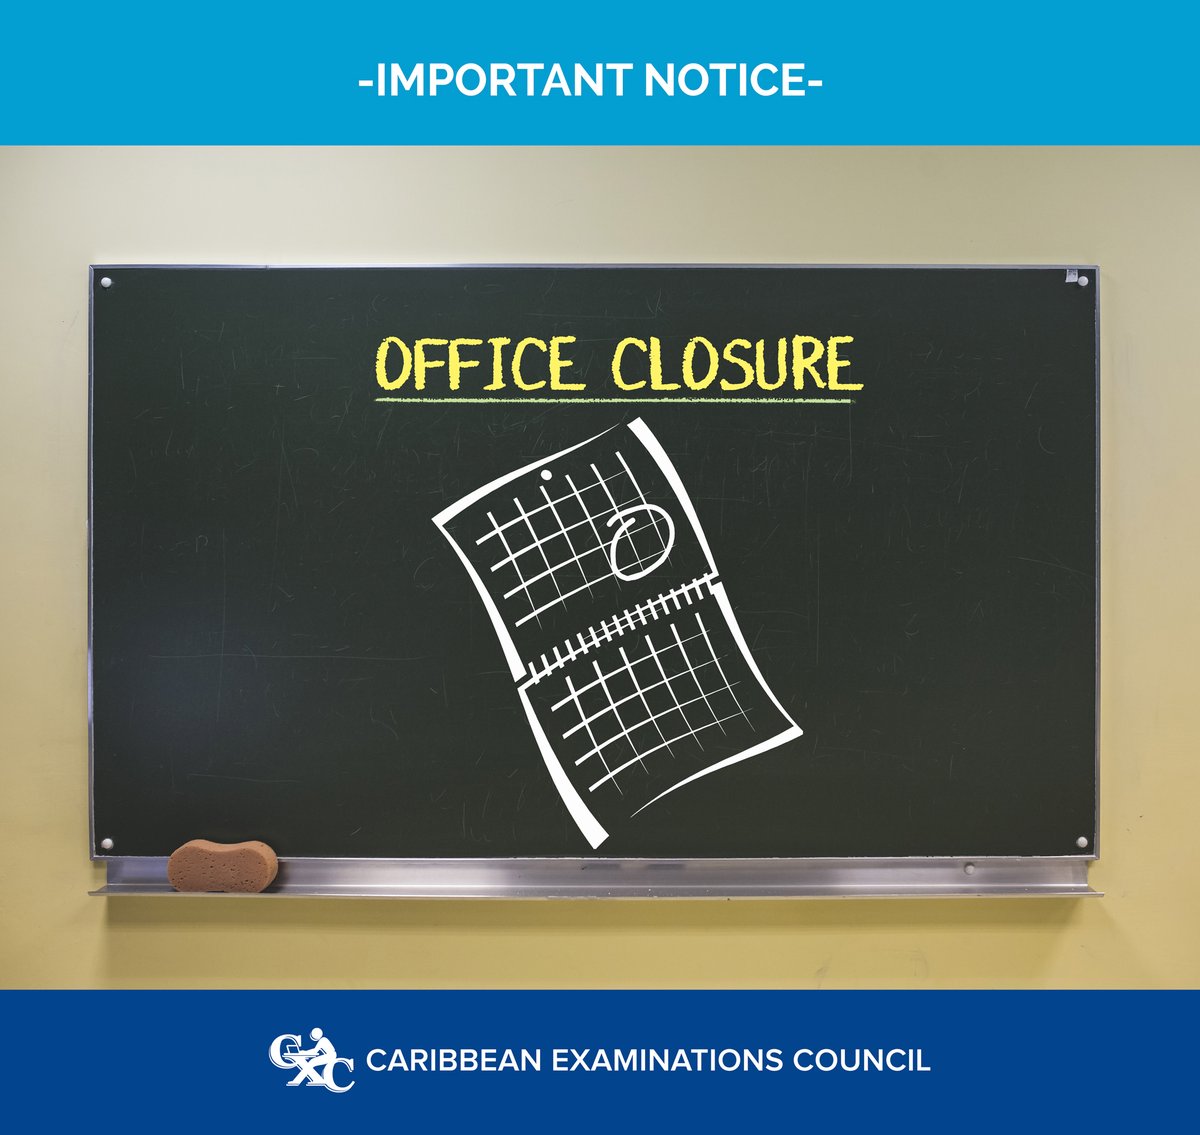 The Caribbean Examinations Council (CXC®) wishes to advise the public that its office in Barbados will be closed on Monday 3 August 2020 in recognition of the Kadooment Day national holiday.  The office will re-open on Tuesday 4 August 2020. #Holiday #ClosureNotice